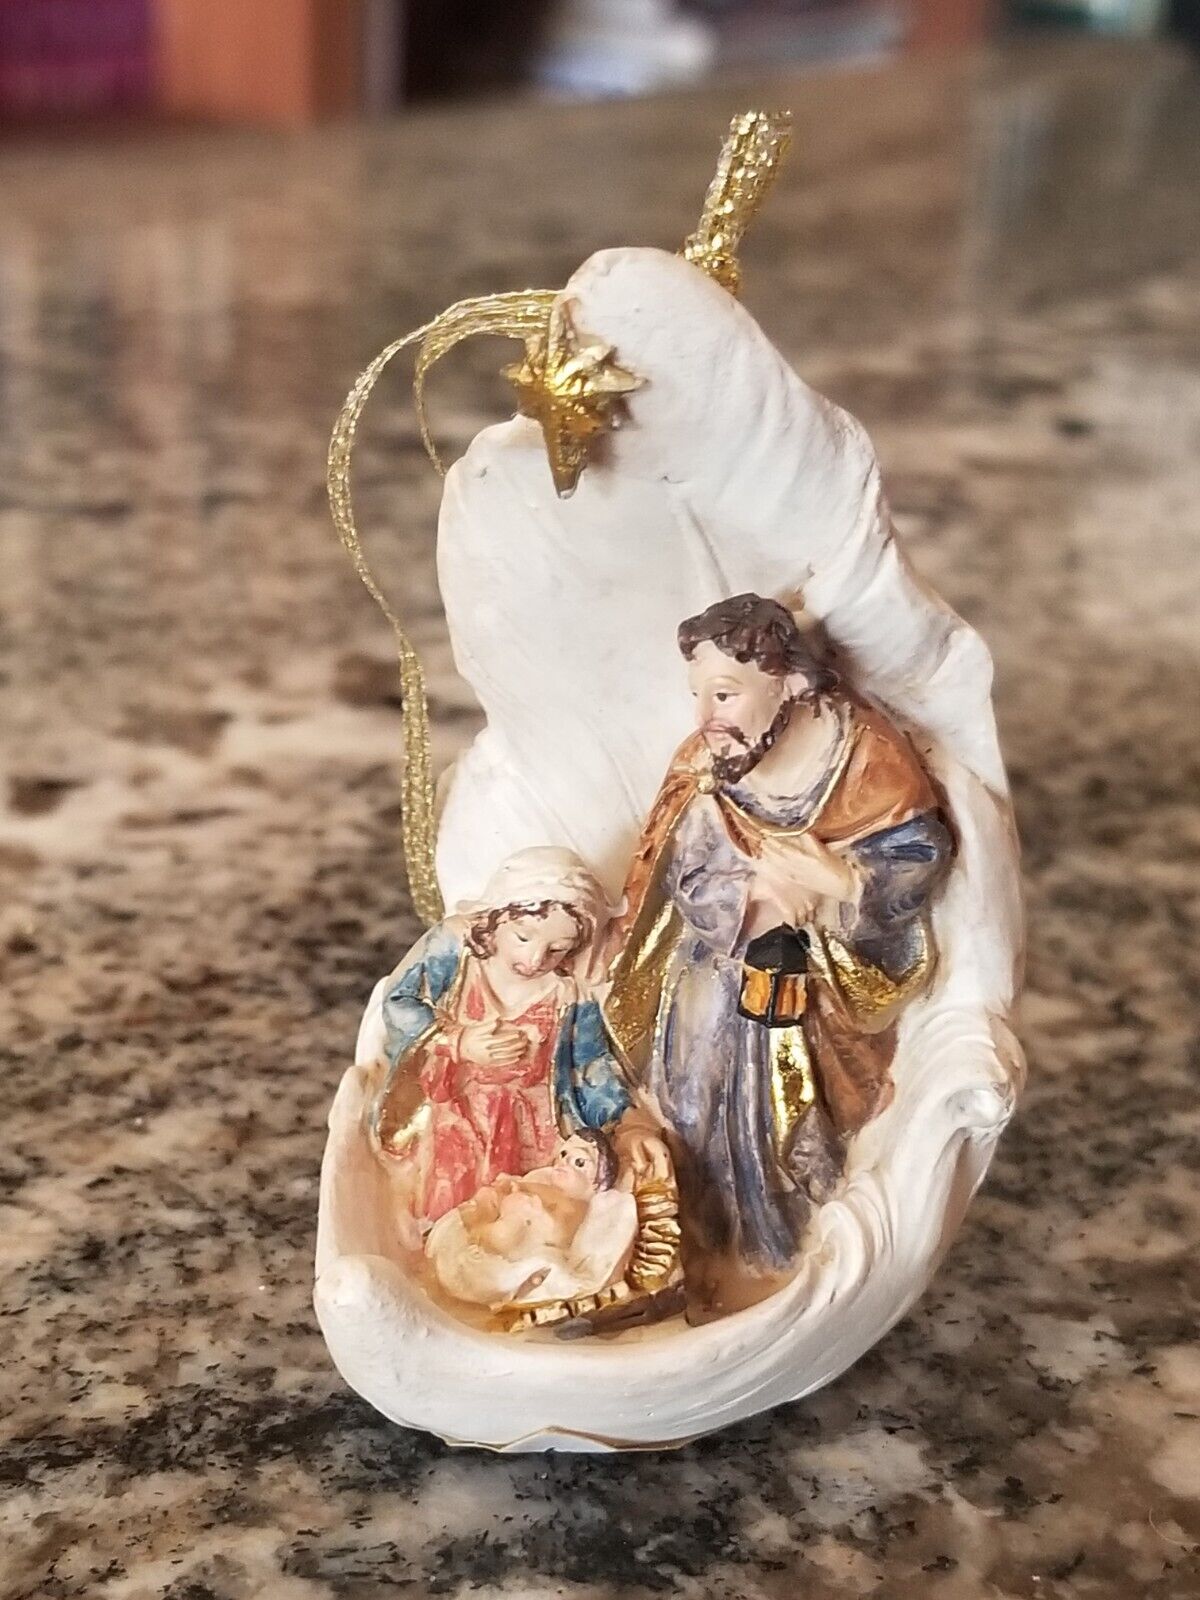 Nativity Resin Tree Ornament - Hand Painted - Holy Family w/ Gold Accents.   NEW